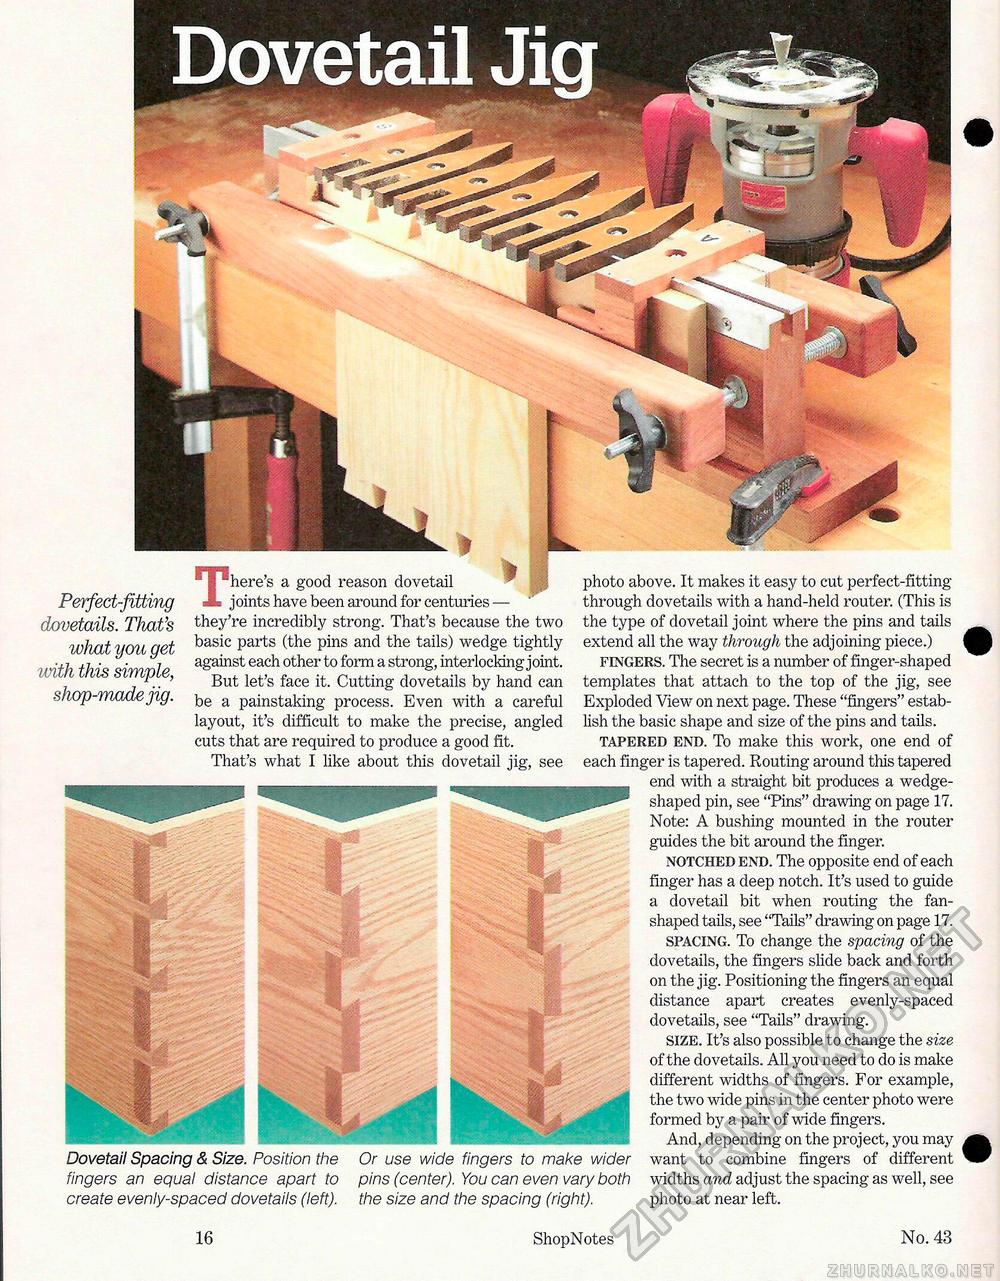 43 - Build Your Own Dovetail Jig,  16